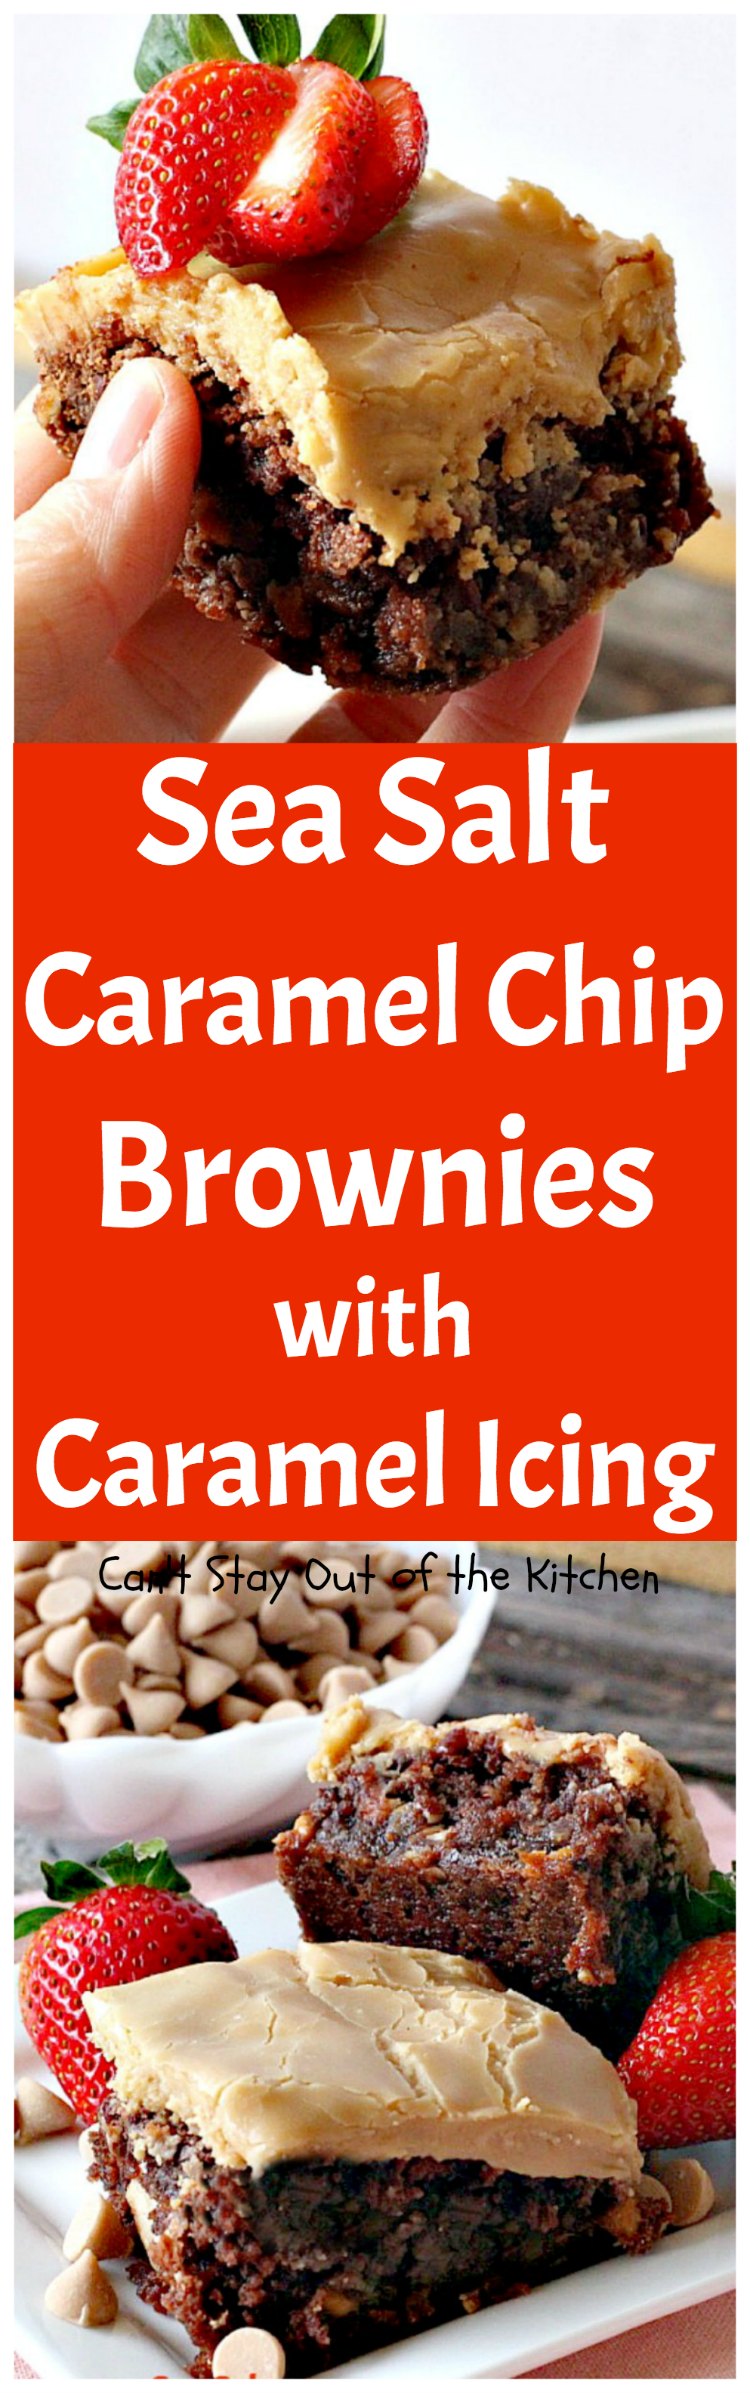 Sea Salt Caramel Chip Brownies with Caramel Icing | Can't Stay Out of the Kitchen | these #brownies are seriously addictive! #caramel chips and #chocolate explode in these heavenly goodies. Rich, decadent, divine! #dessert